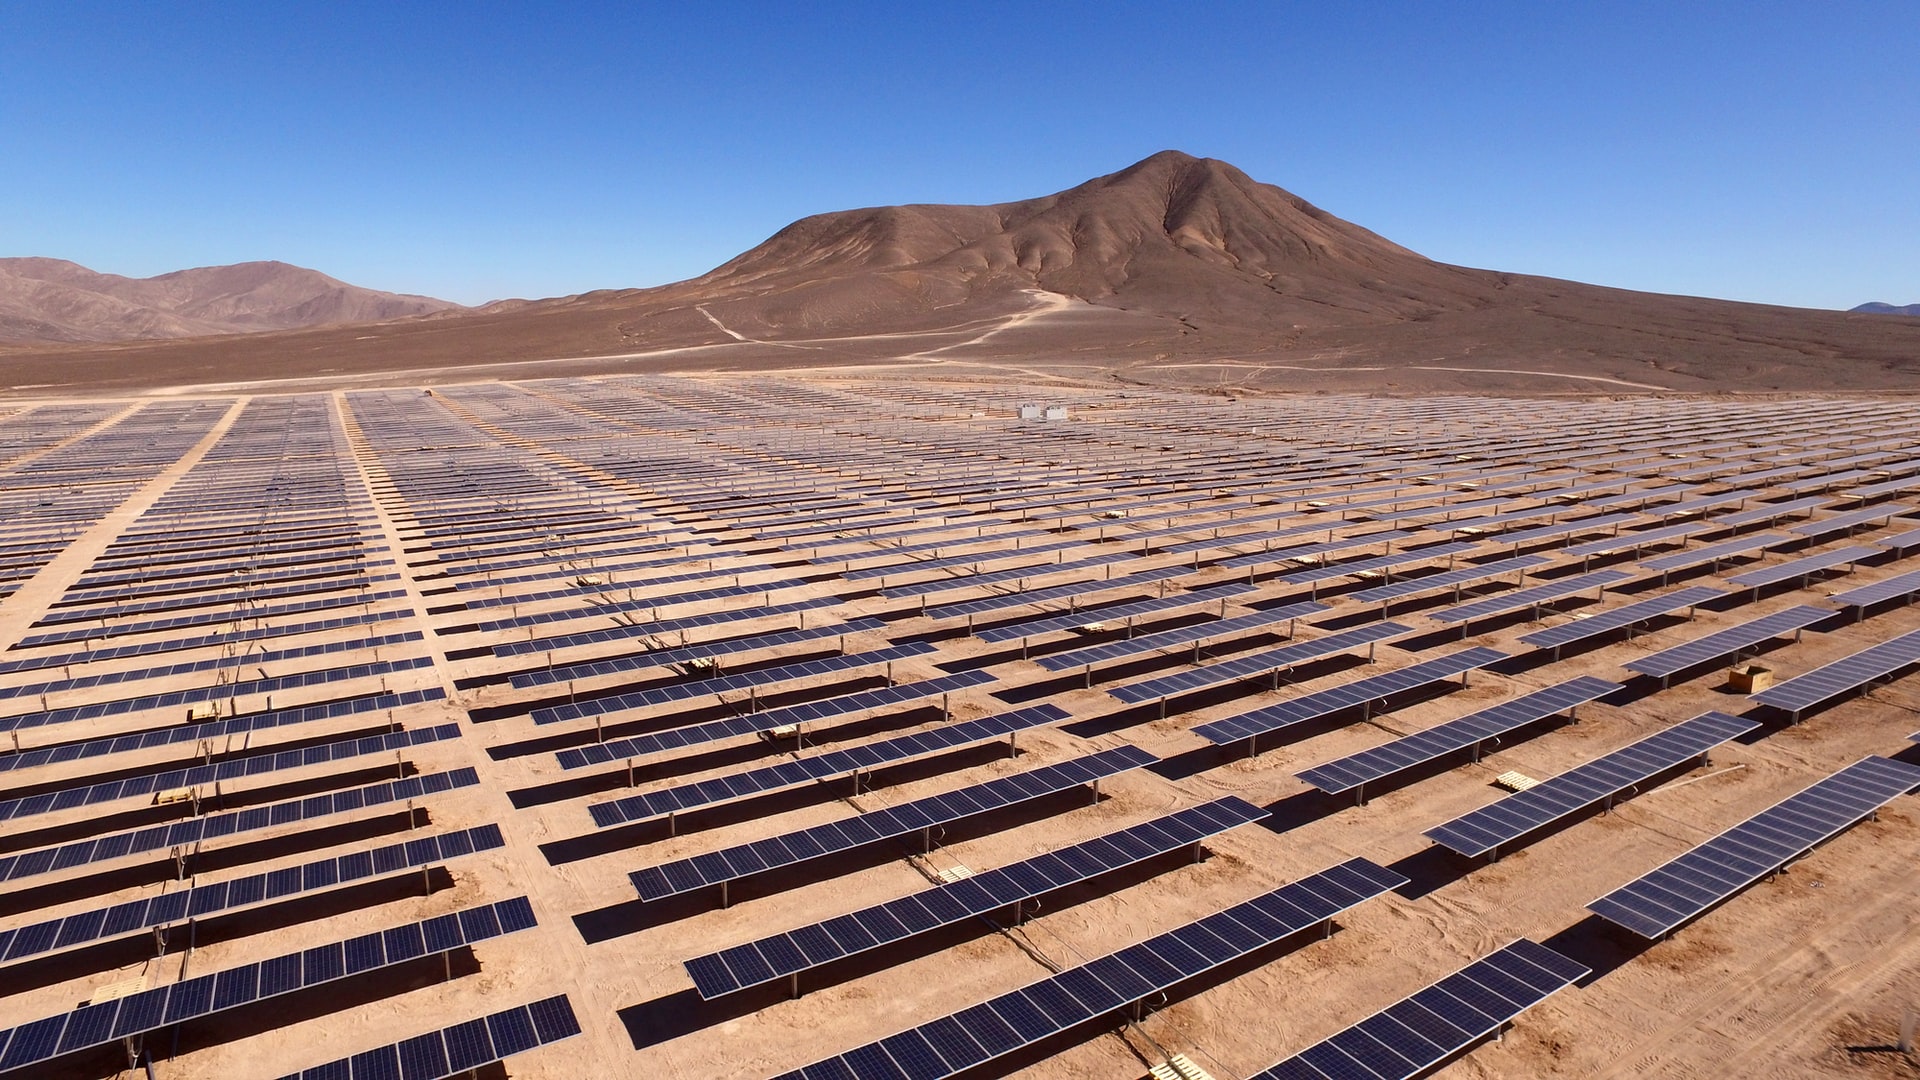 Solar Surges into the New Year as Big Oil Begins Their Own Renewable Rollout